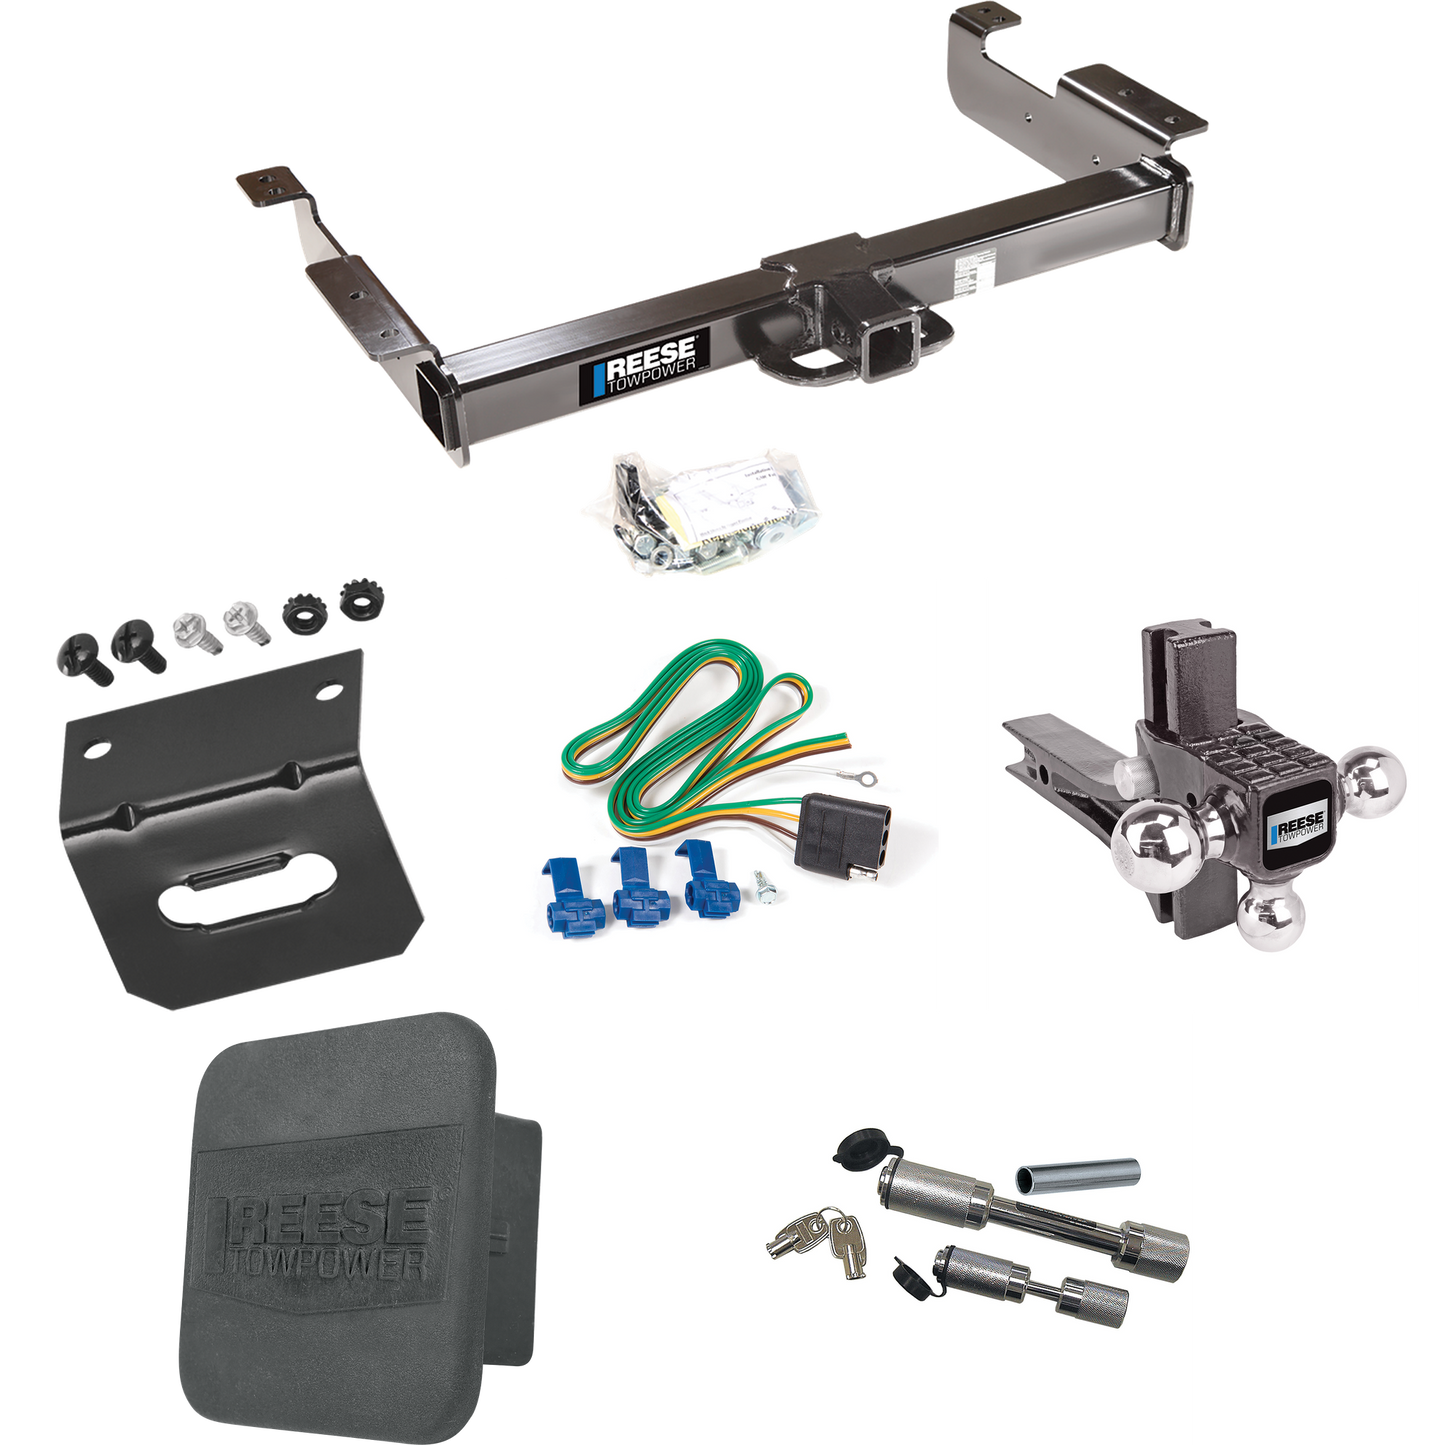 Fits 1996-1999 Chevrolet Express 1500 Trailer Hitch Tow PKG w/ 4-Flat Wiring Harness + Adjustable Drop Rise Triple Ball Ball Mount 1-7/8" & 2" & 2-5/16" Trailer Balls + Dual Hitch & Coupler Locks + Hitch Cover + Wiring Bracket By Reese Towpower